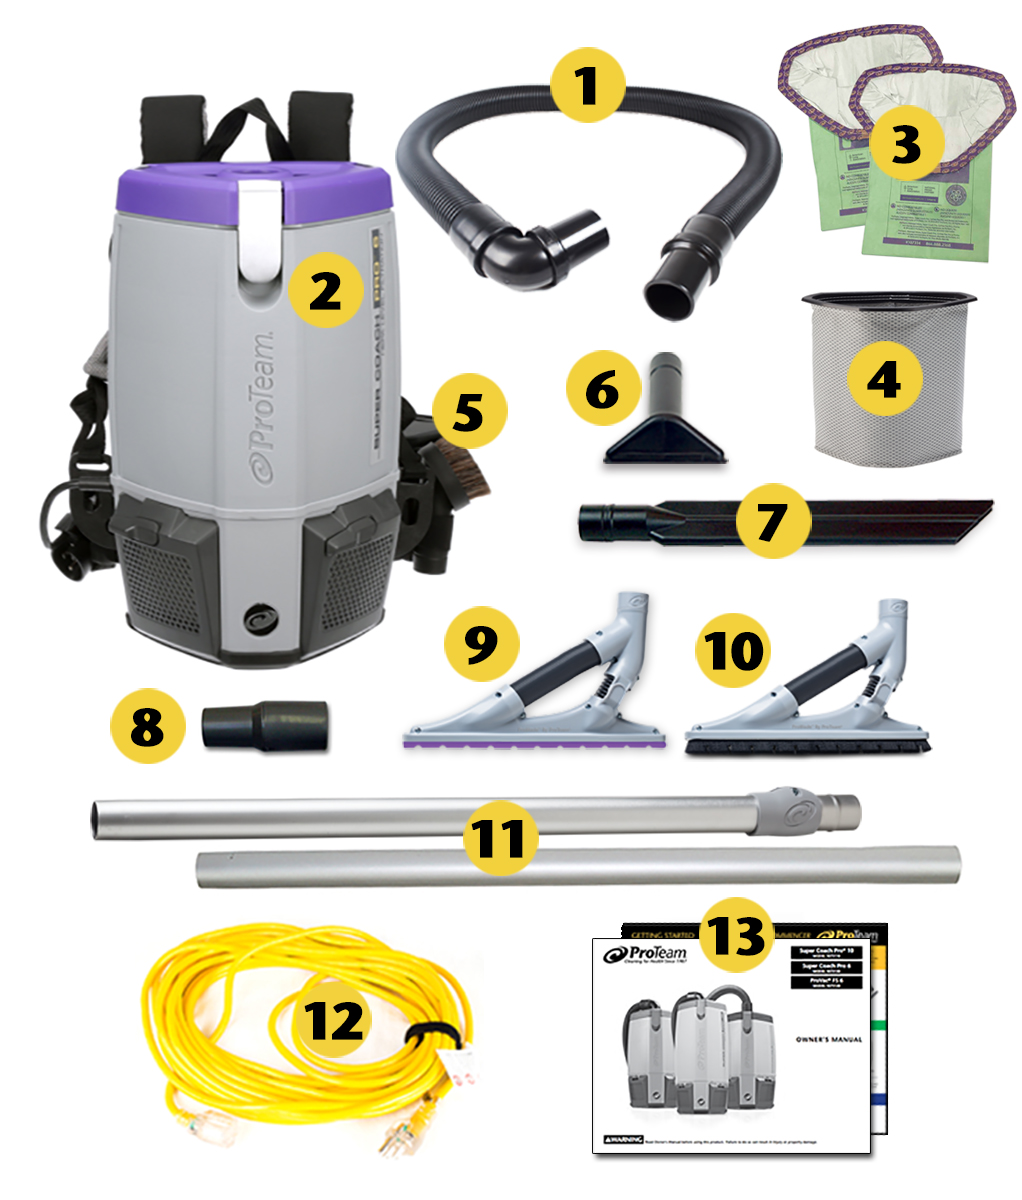 Image of what is included in the box of ProTeam Super Coach Pro 6, 6 quart backpack vacuum